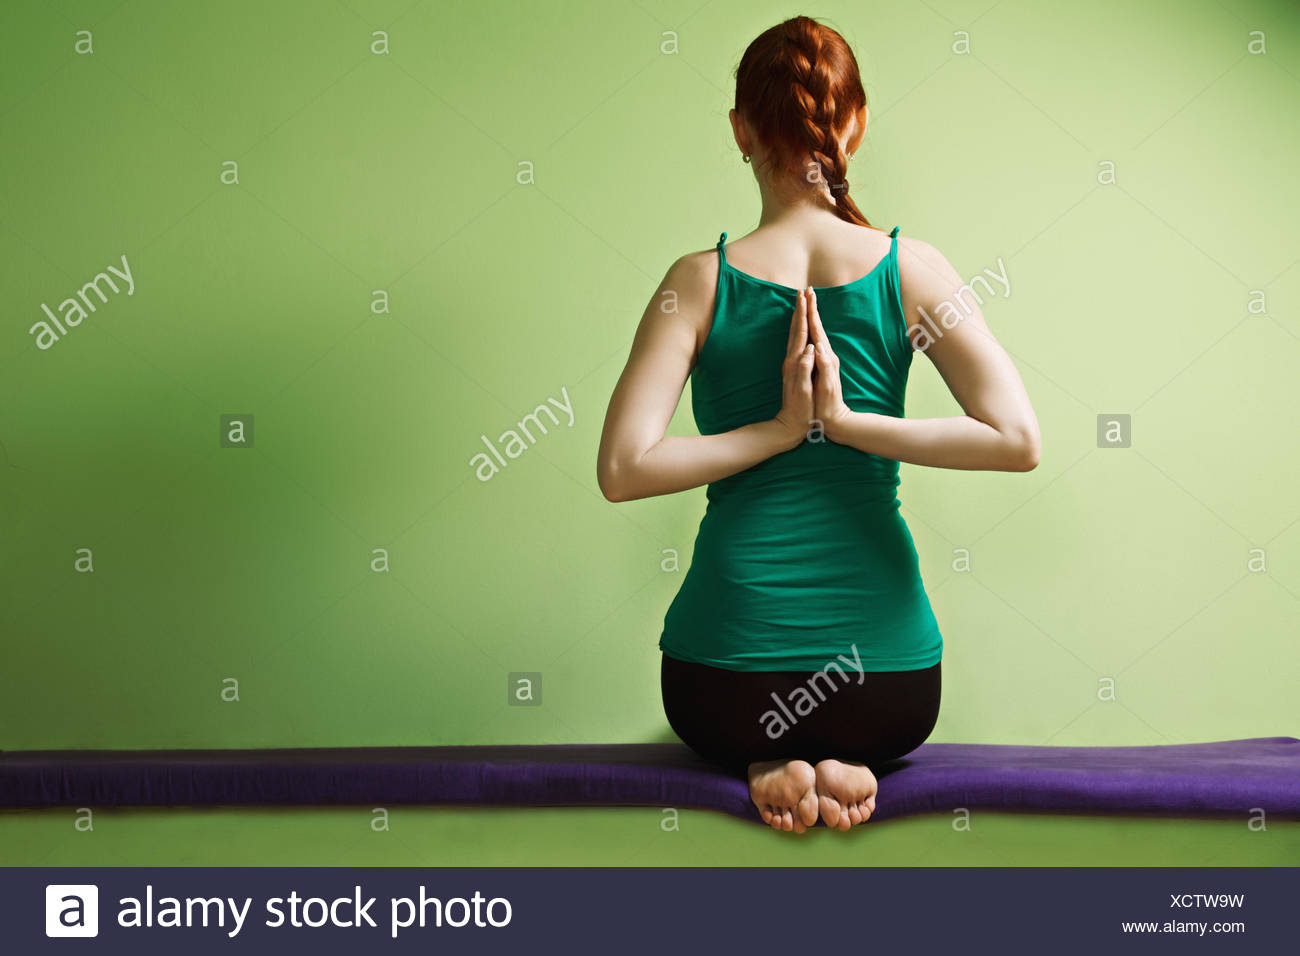 Yoga Posture Hands Behind Back High Resolution Stock Photography And